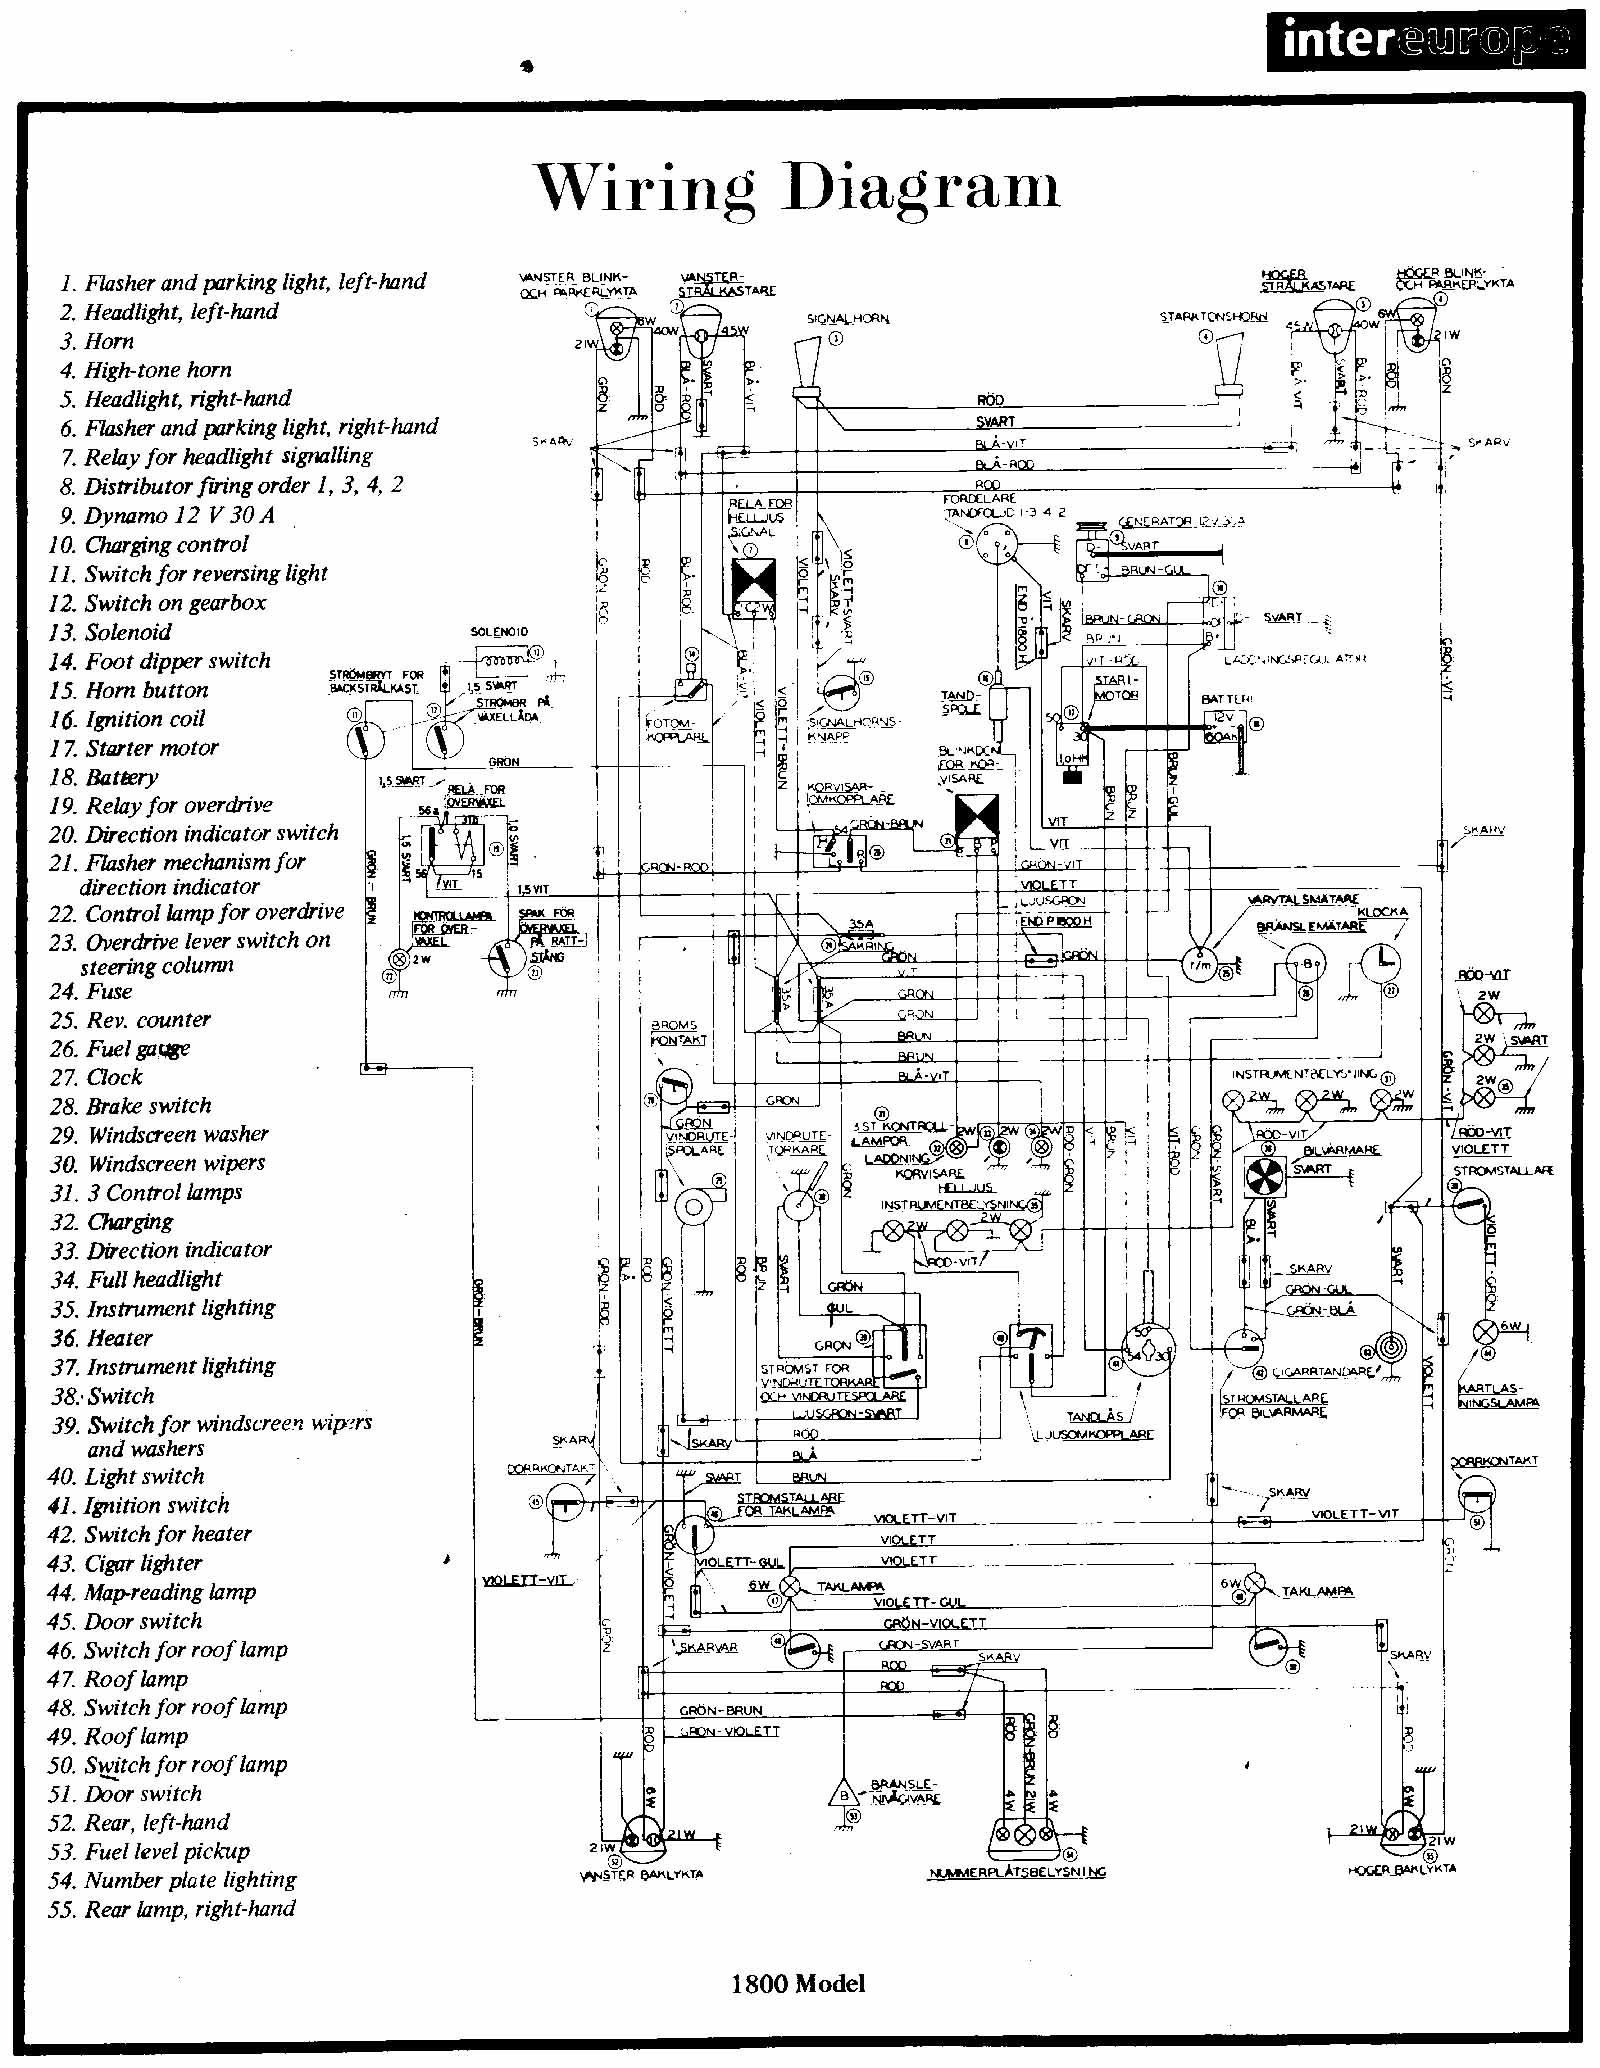 Semi Truck Trailer Wiring Diagram which Wires Need Swapping to Third Generation F Of Semi Truck Trailer Wiring Diagram